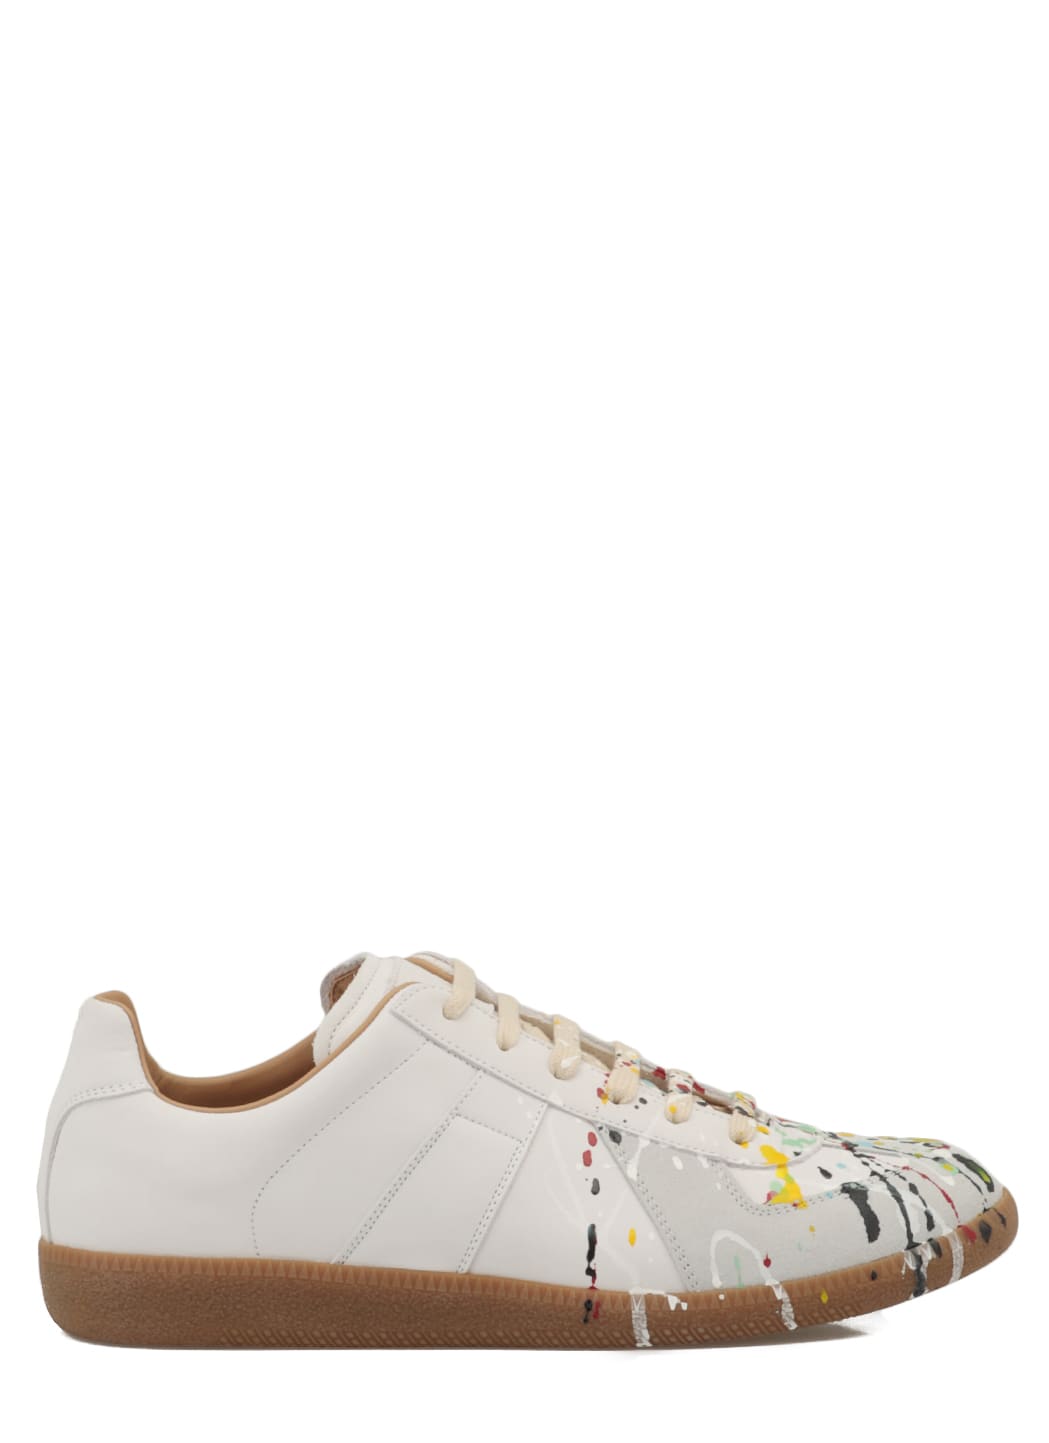 Maison Margiela Replica Sneakers With Paint